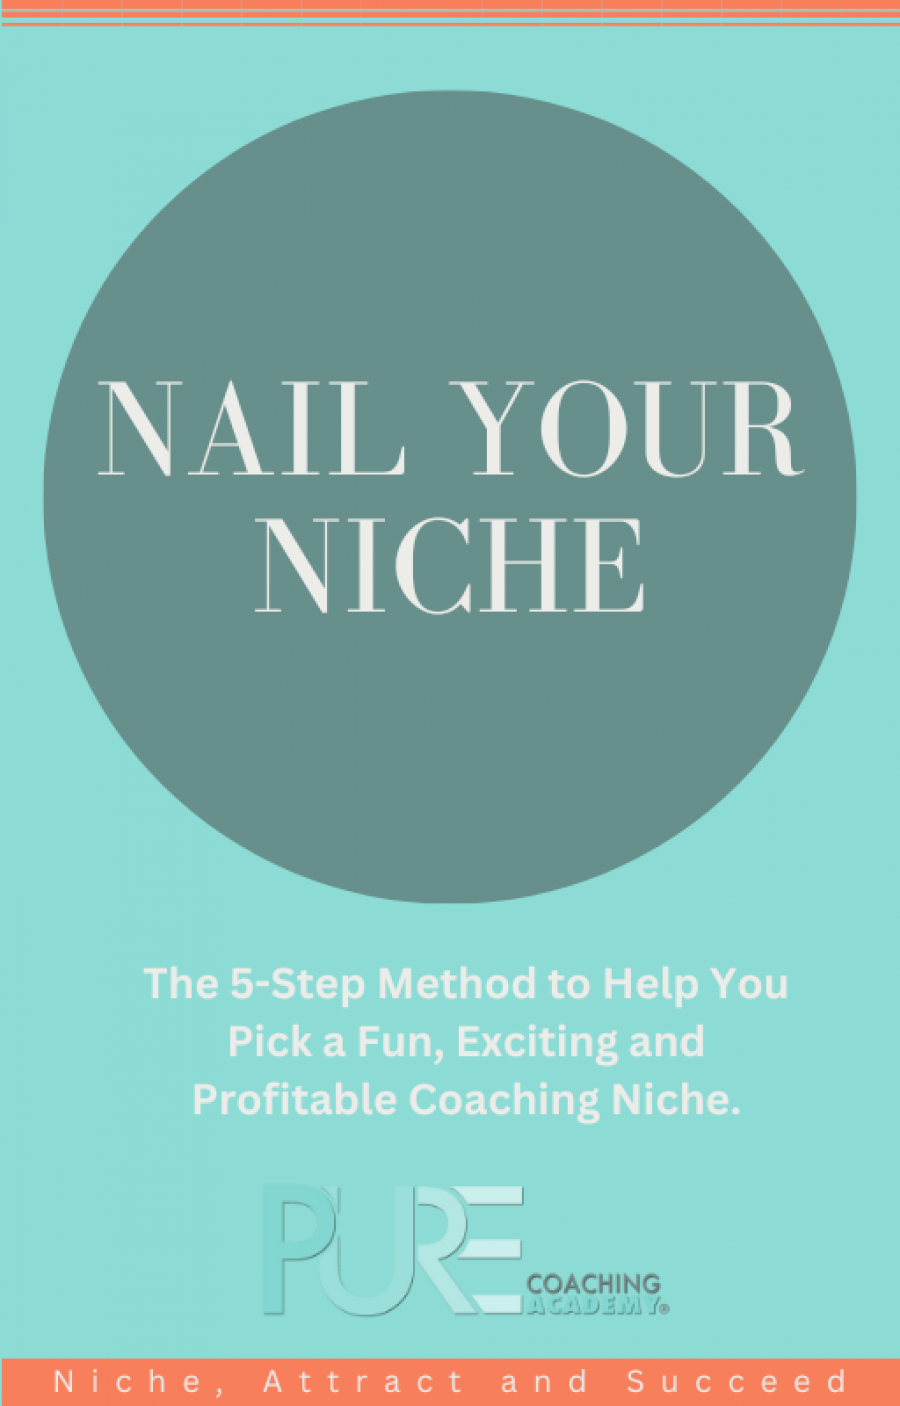 How to choose your perfect coaching niche.